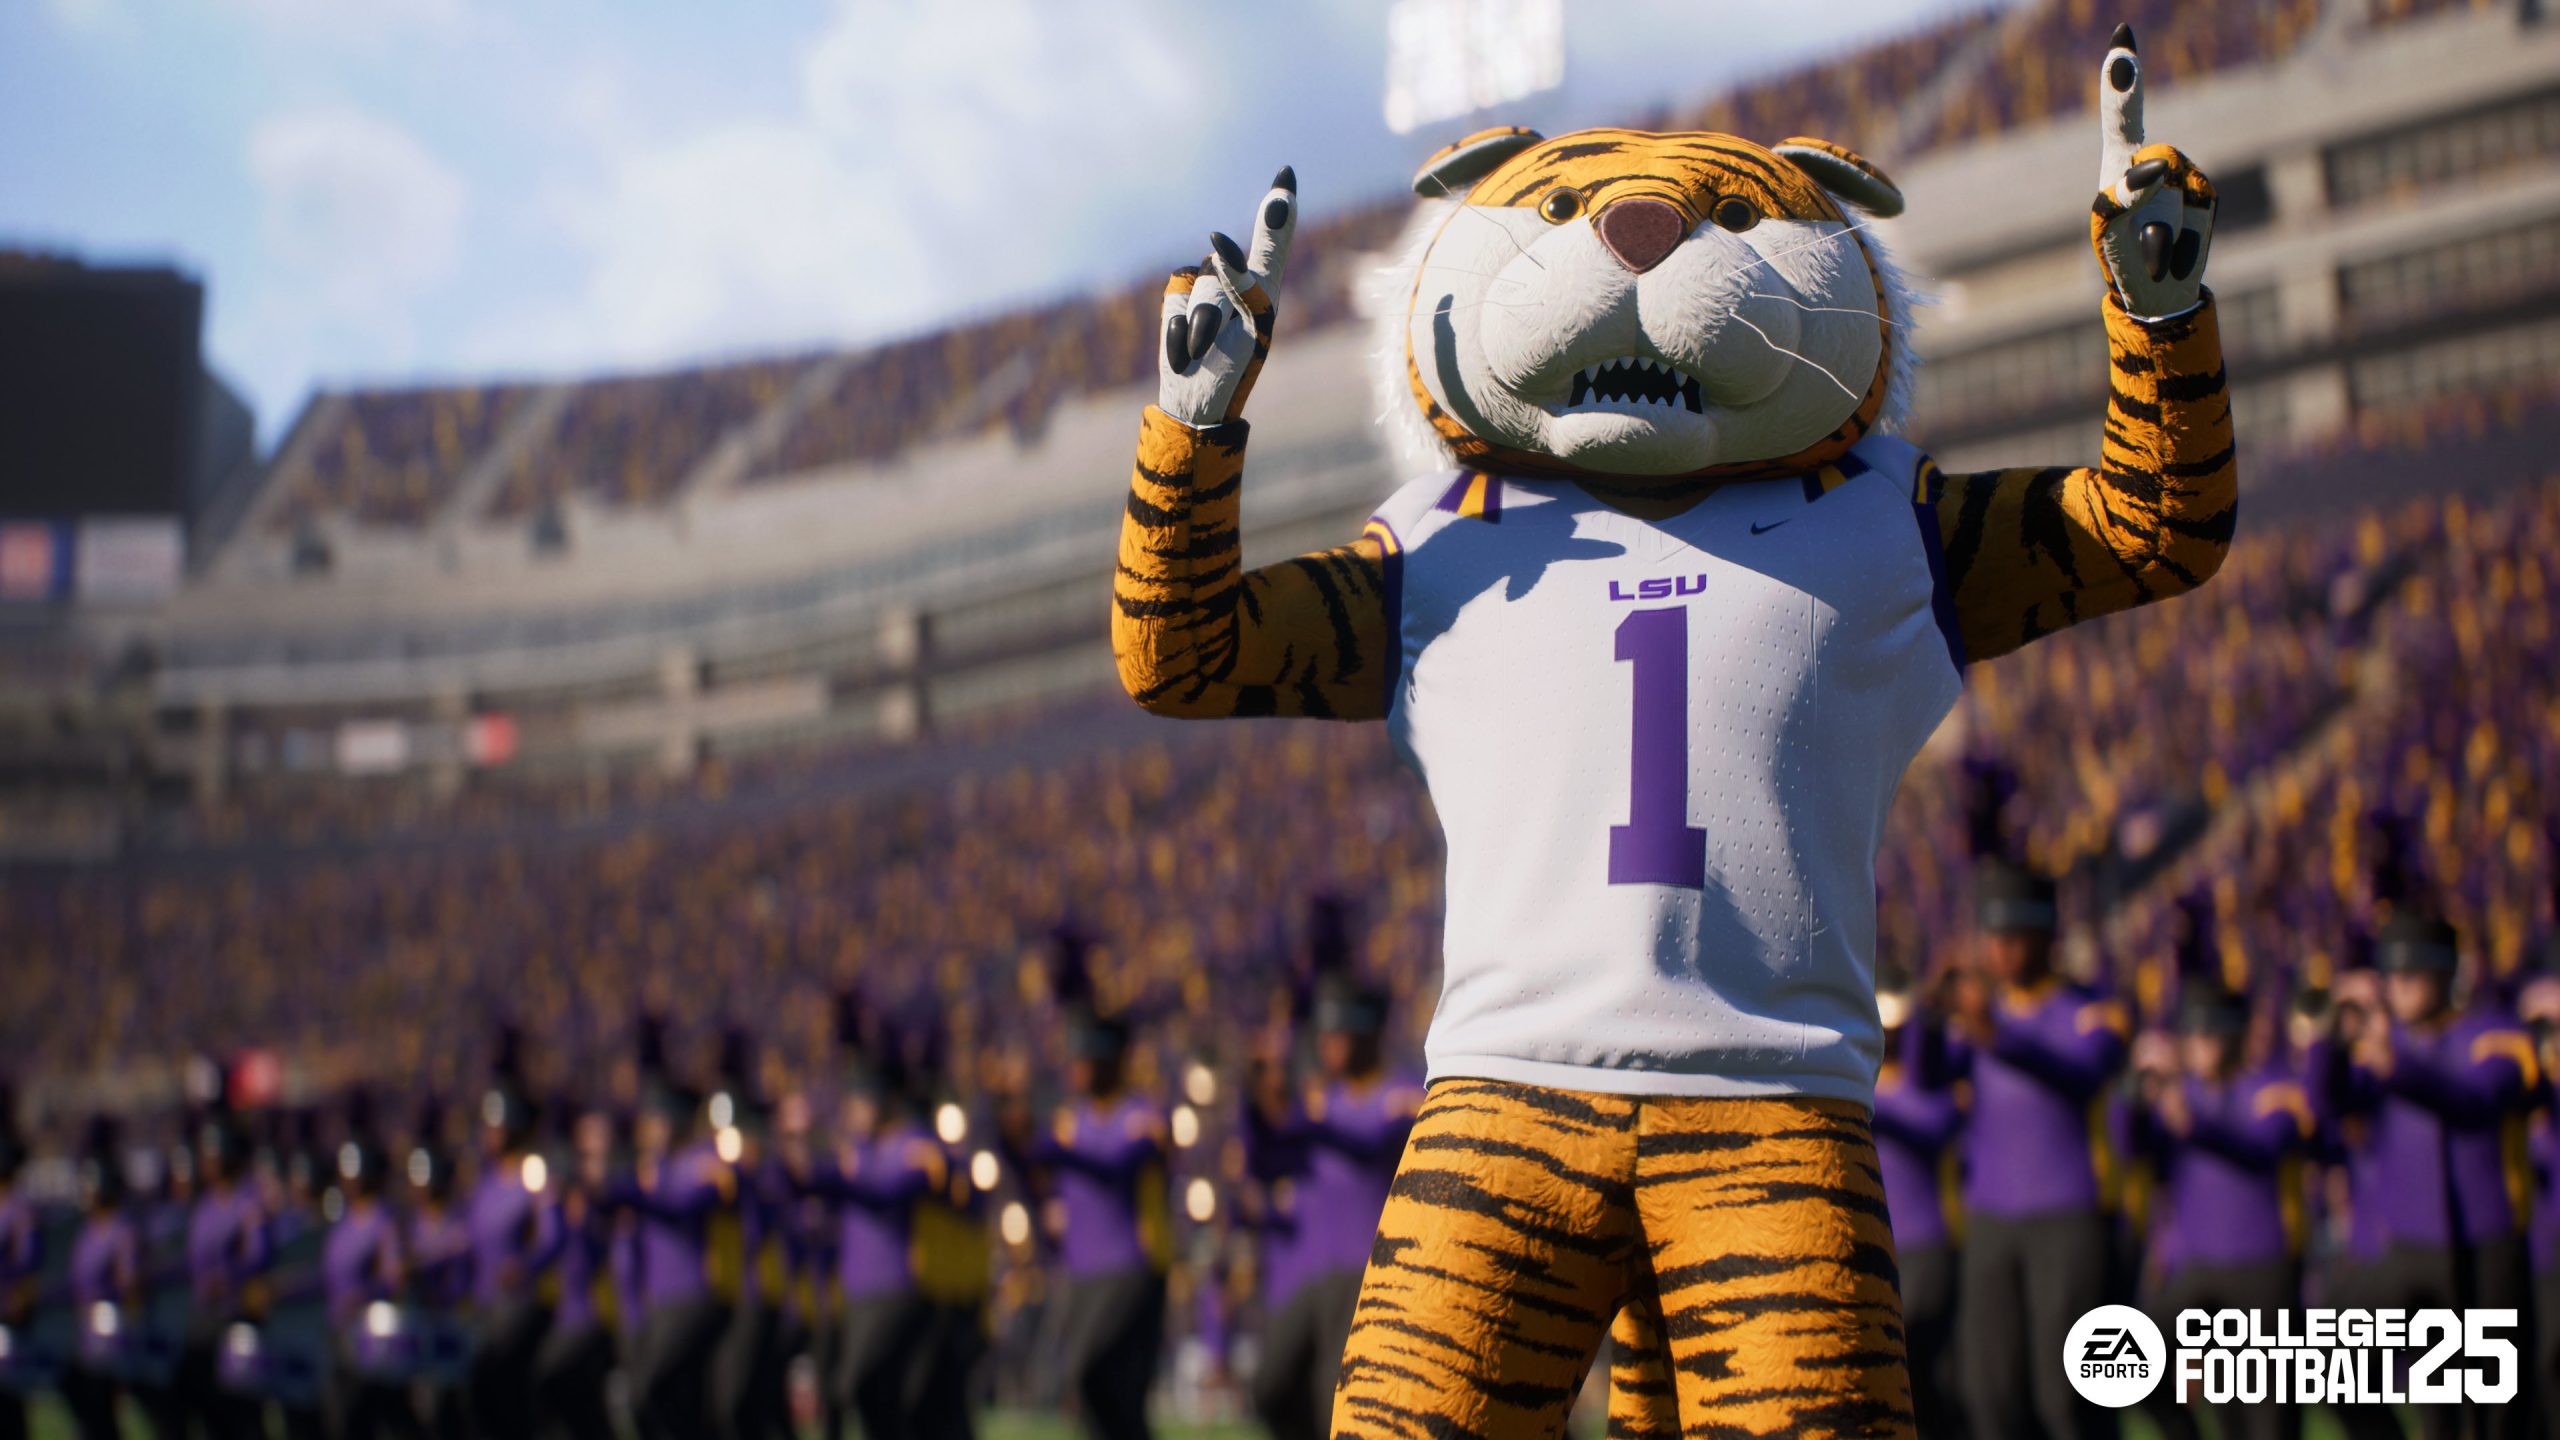 LSU's human costumed mascot Mike the Tiger as he appears in EA Sports College Football 25